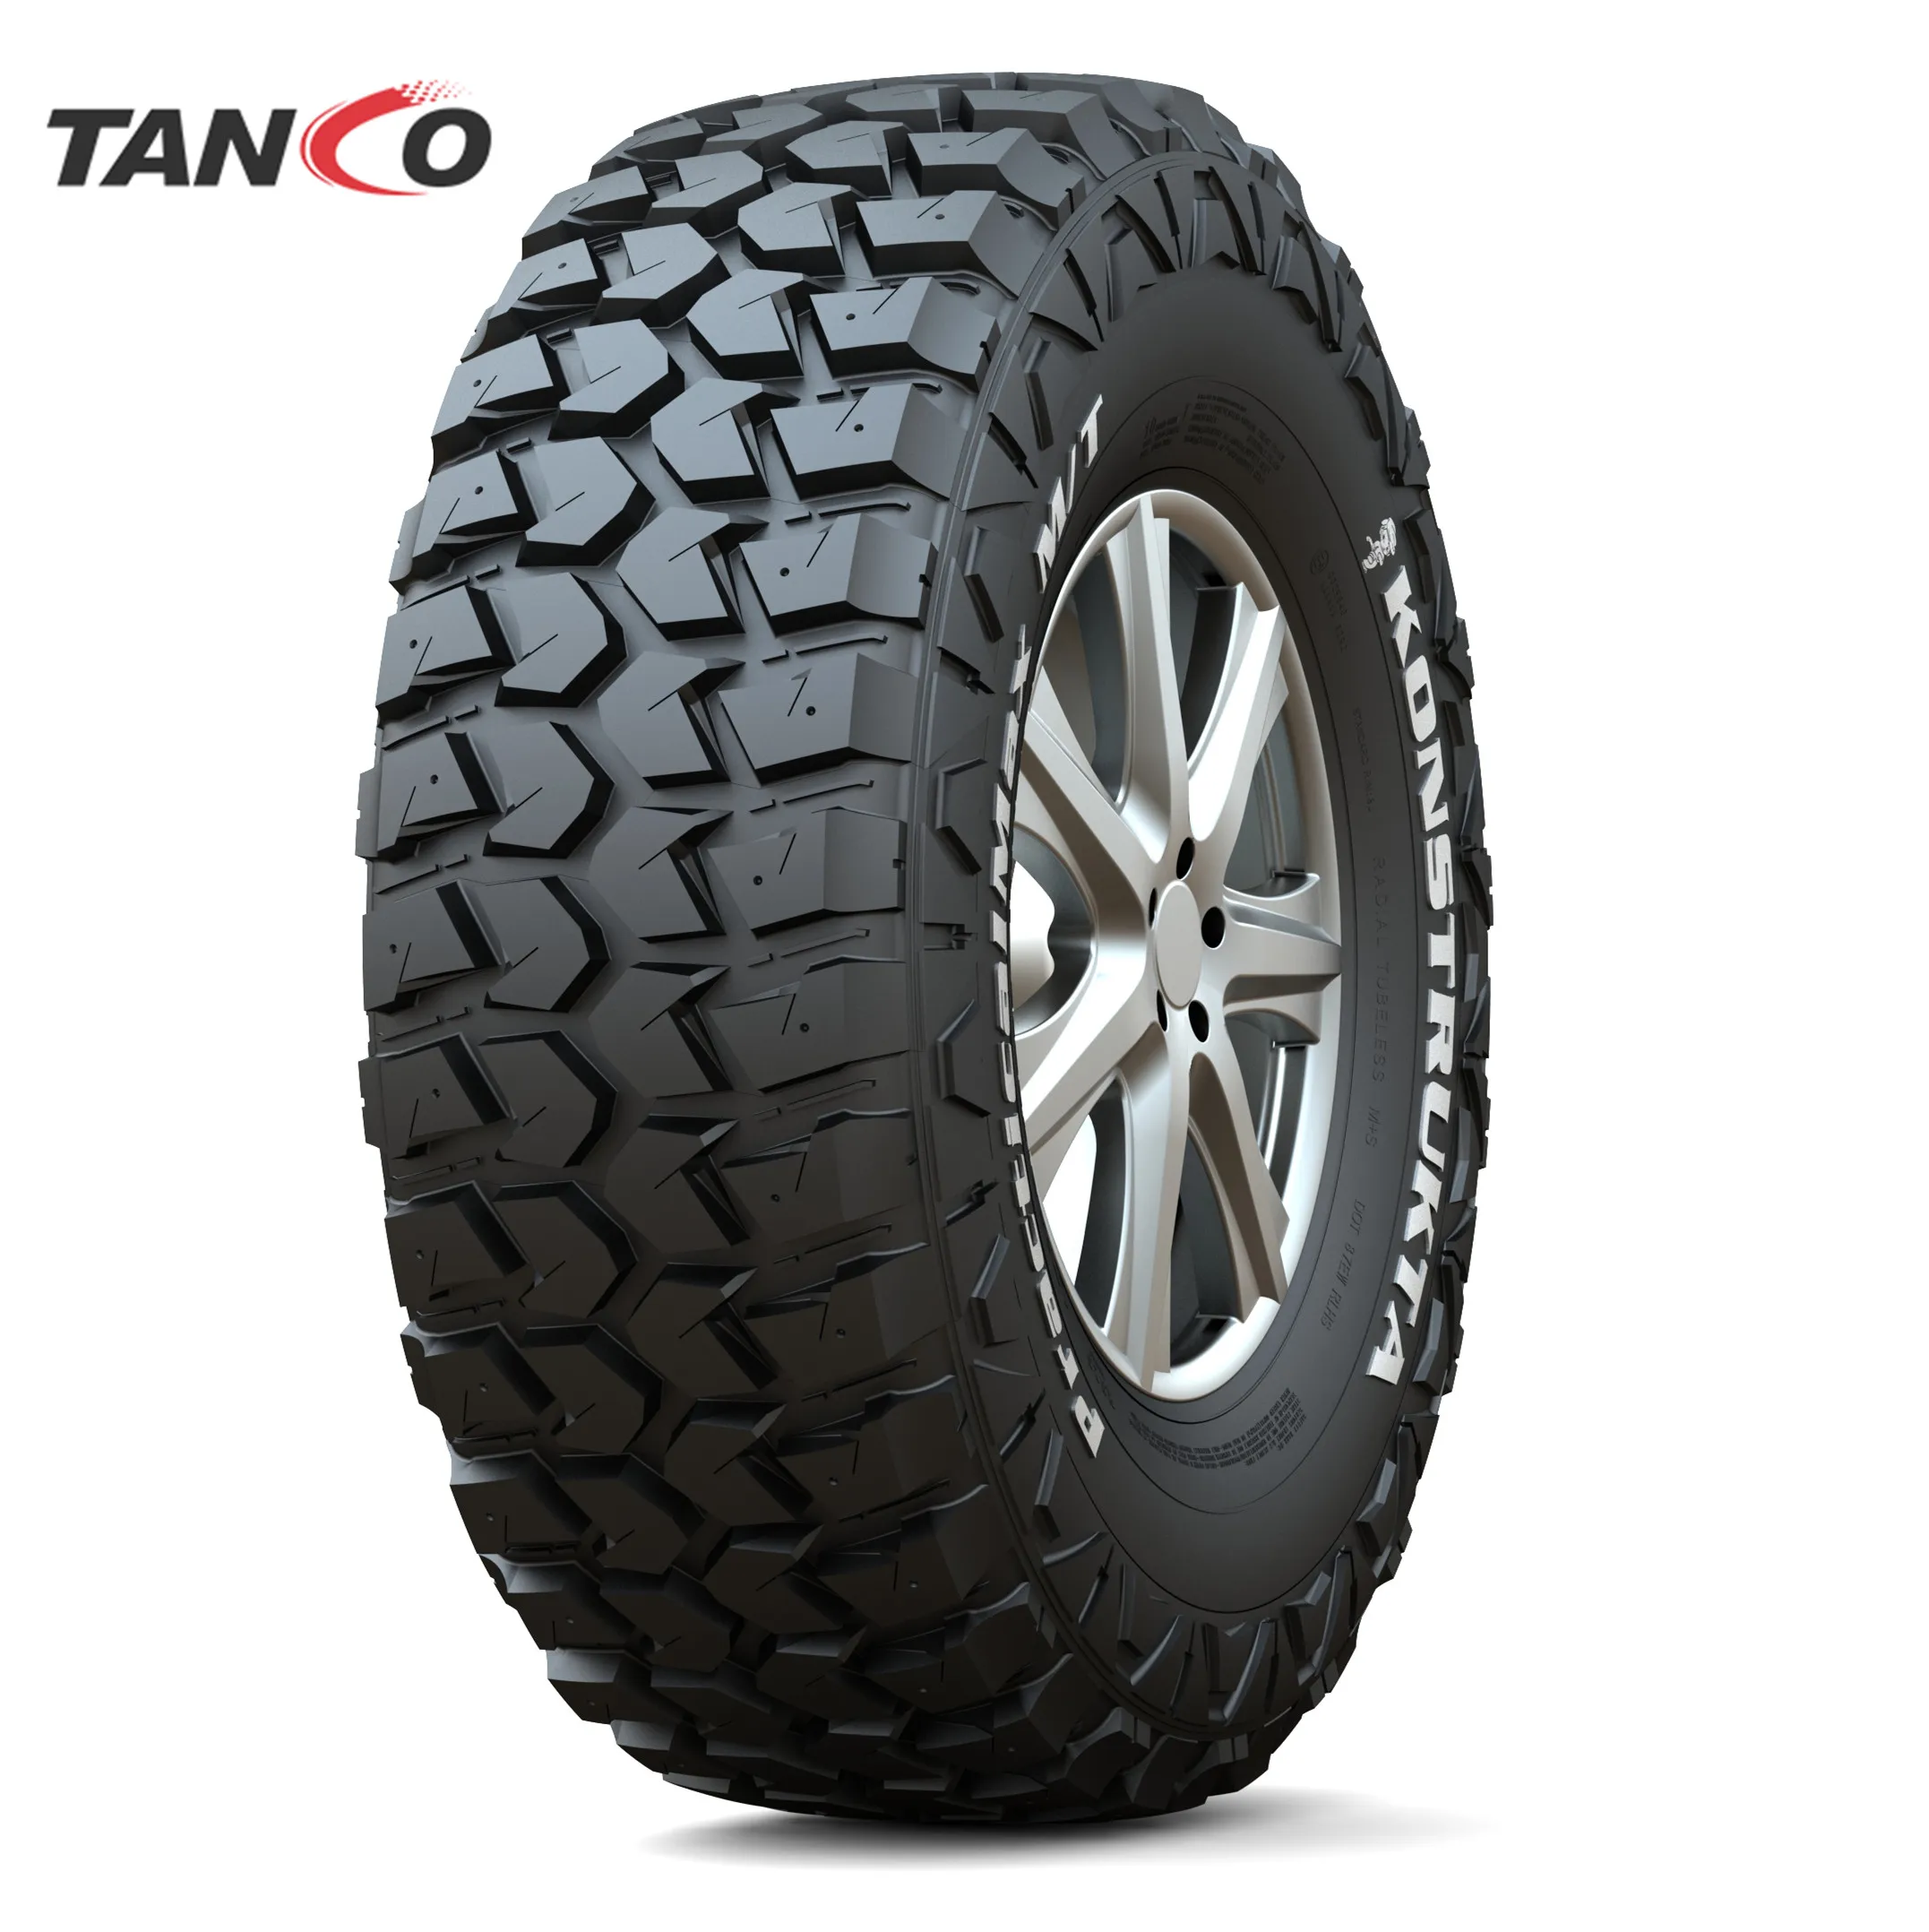 Cheap Price Winter Car Tire Size 175 70r13 175 65r14 235 70 16 225 50 17 5 55r16 195 60r16 215 65r16 Snow Tire For Sale Buy Winter Car Tire Direct From China Car Tyre 175 65r14 235 70 16 225 45 R17 5 55r16 195 55r16 215 65r16 Snow